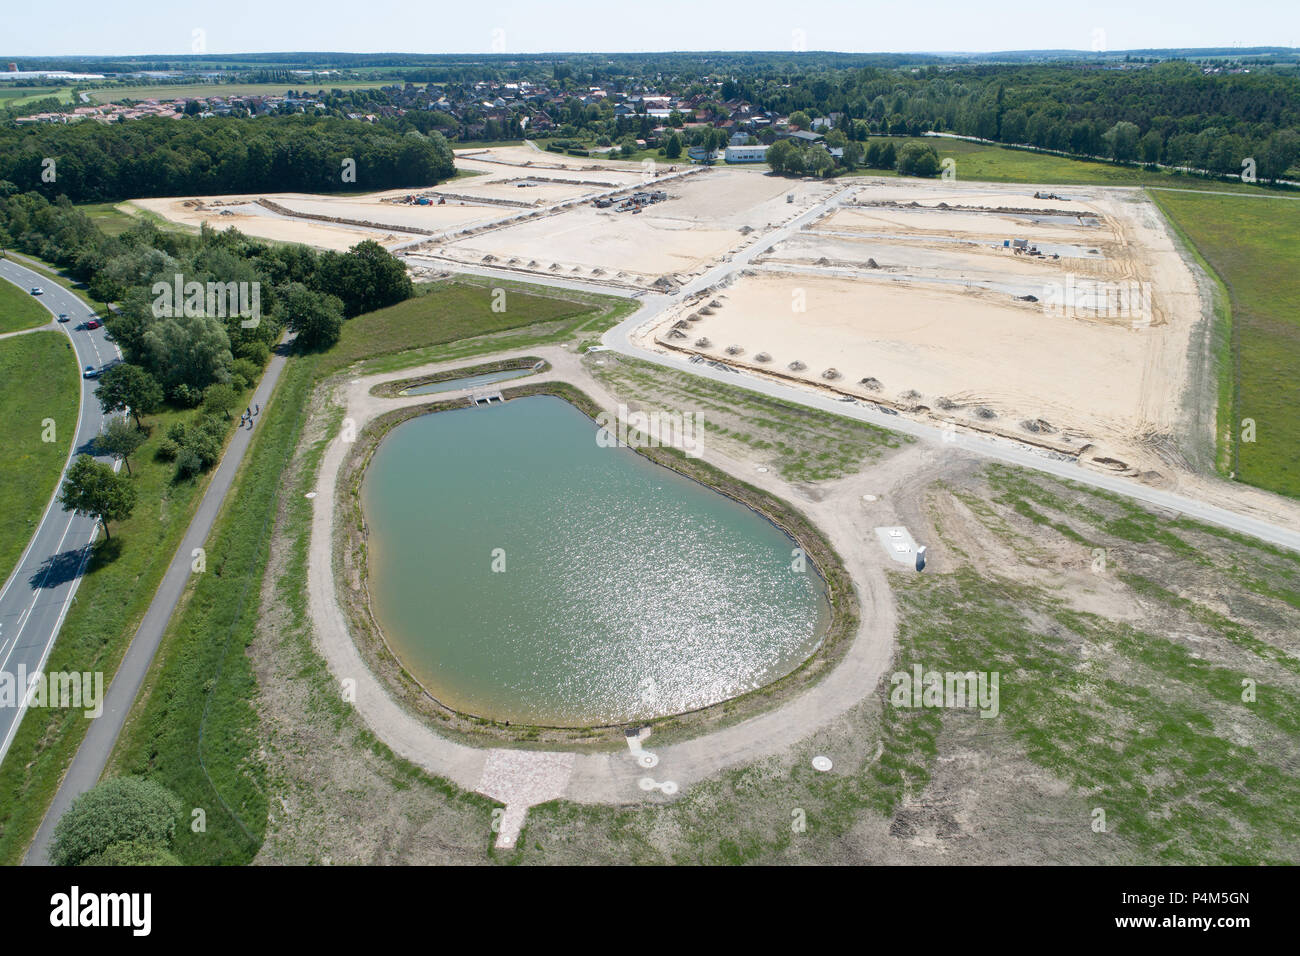 Aerial view from a rainwater basin and a new development area on sandy ground with the planum for new houses, taken at an angle, great height Stock Photo